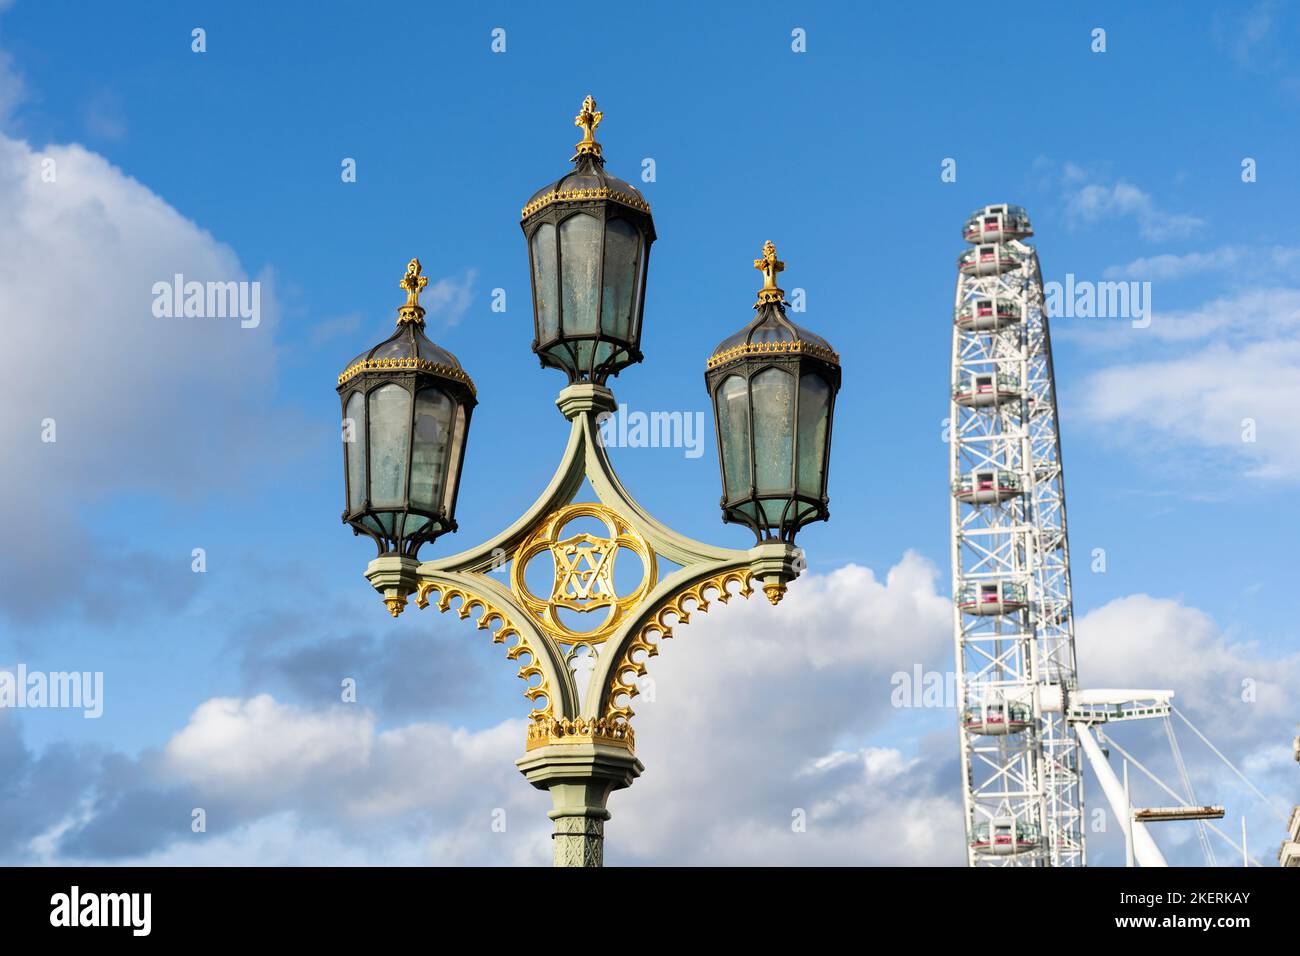 An ornate streetlight with three lanterns on Westminster Bridge, with the London Eye behind. The bridge links Westminster with Lambeth. England Stock Photo